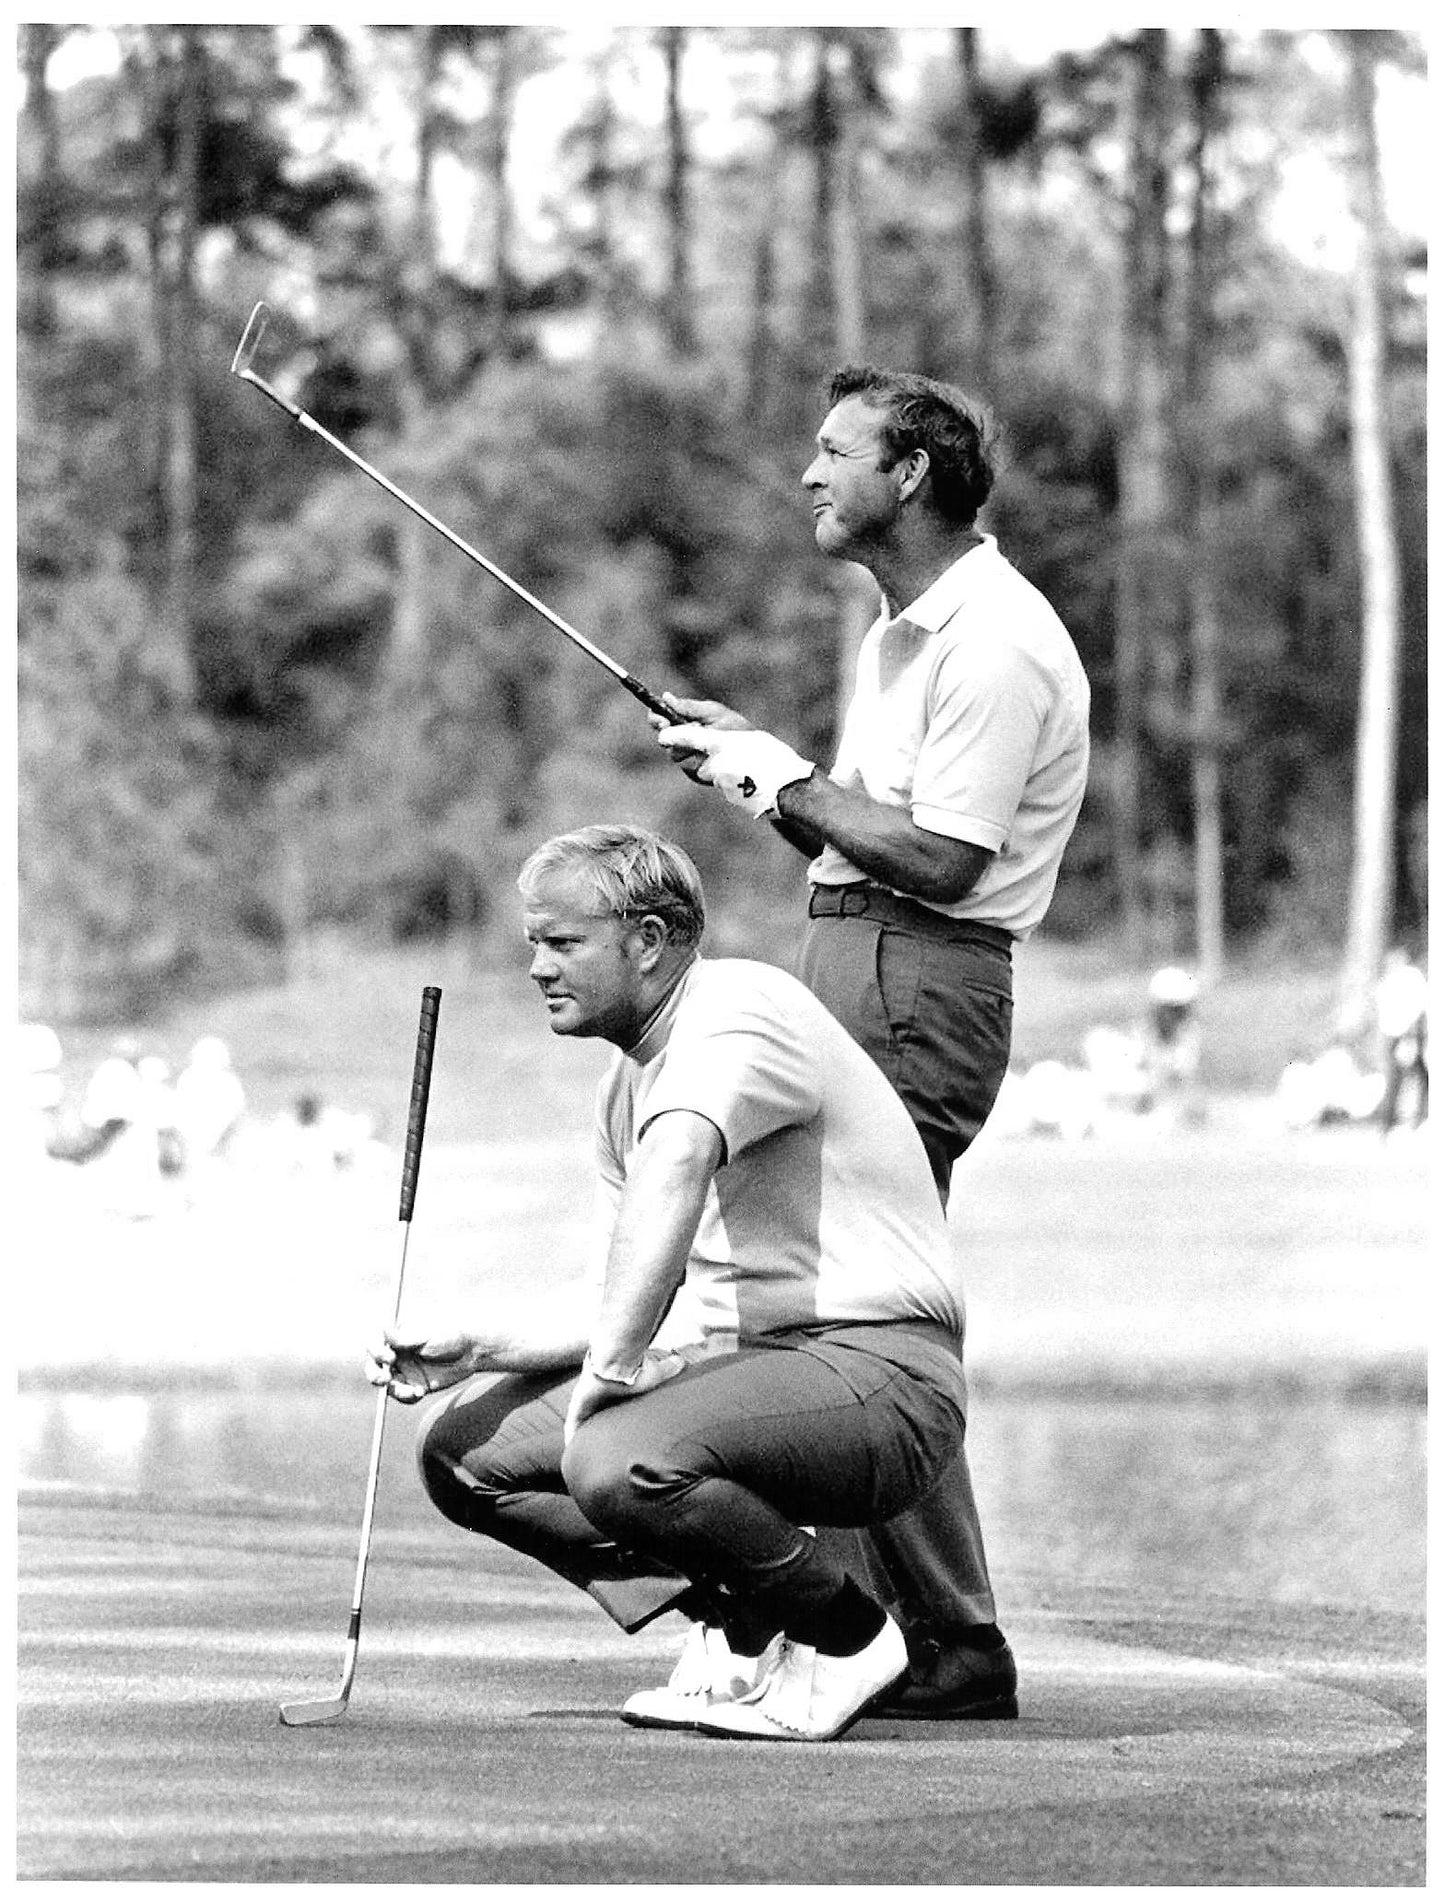 Arnold Palmer and Jack Nicklaus together in the 1972 Masters, 8x10 Photo